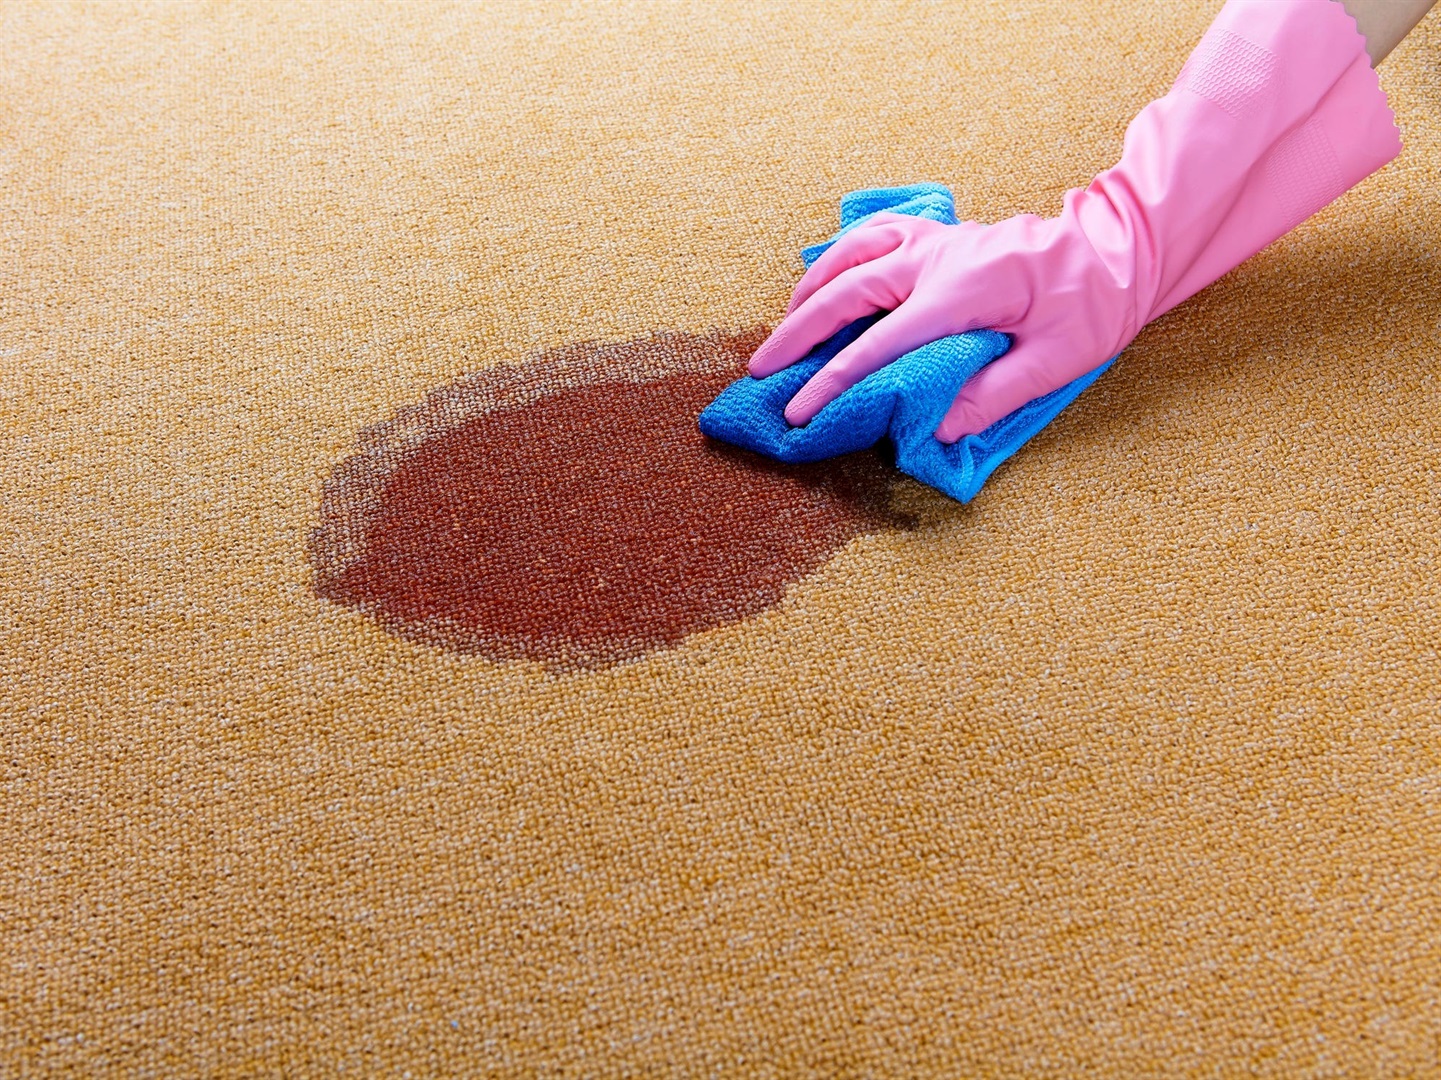 When removing stains on carpet, blot, don't scrub. pinstock/Getty Images